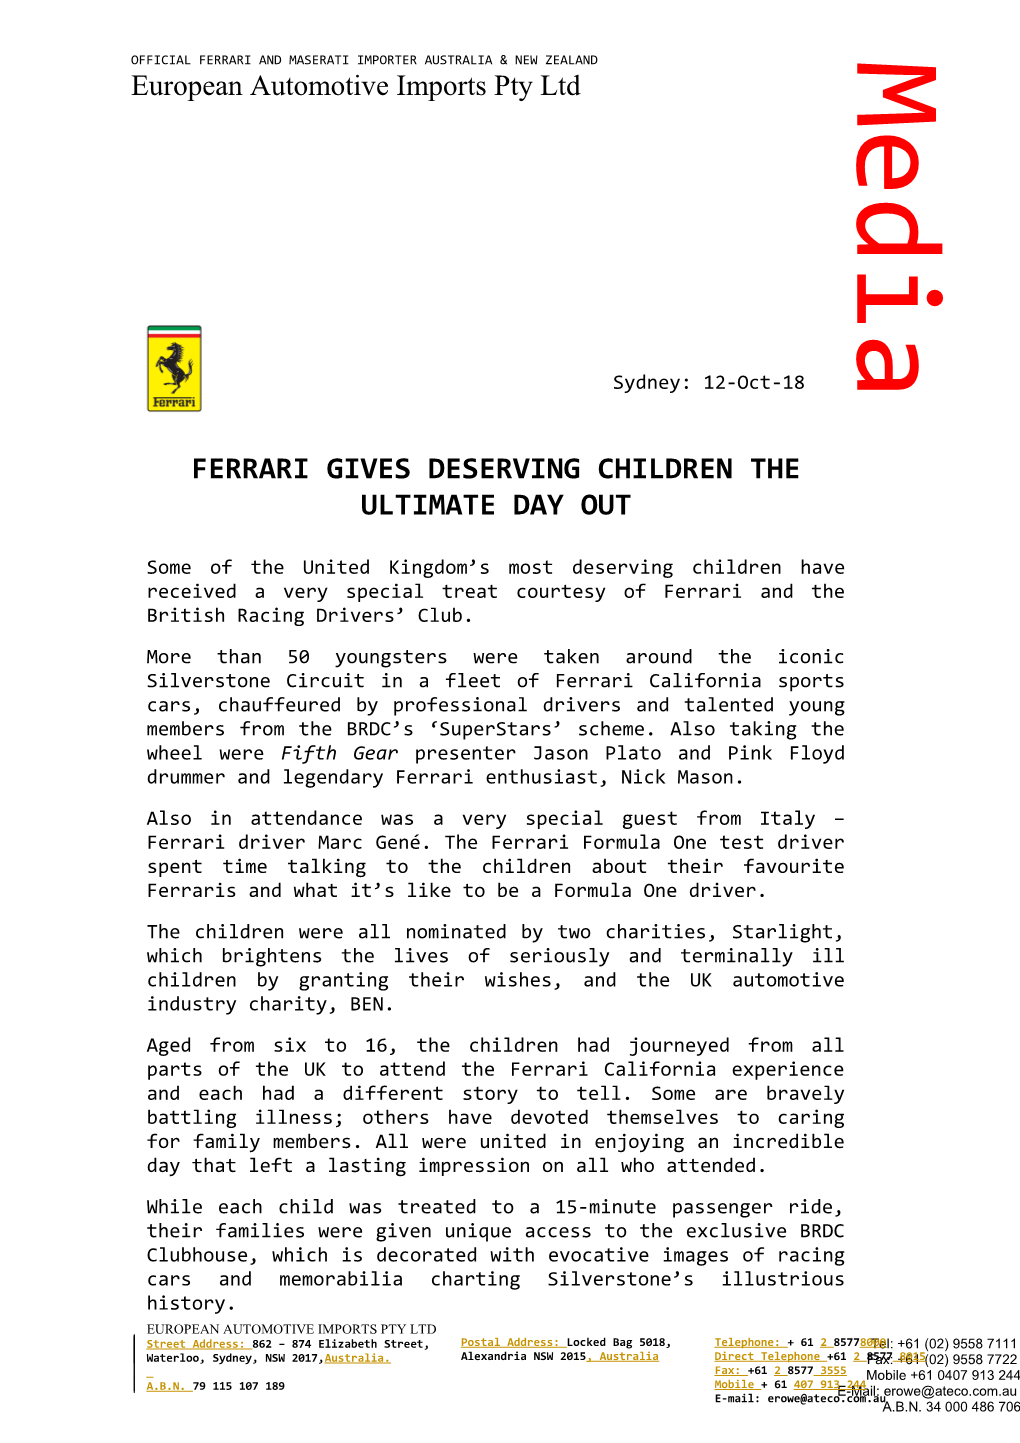 Ferrari Gives Deserving Children the Ultimate Day Out